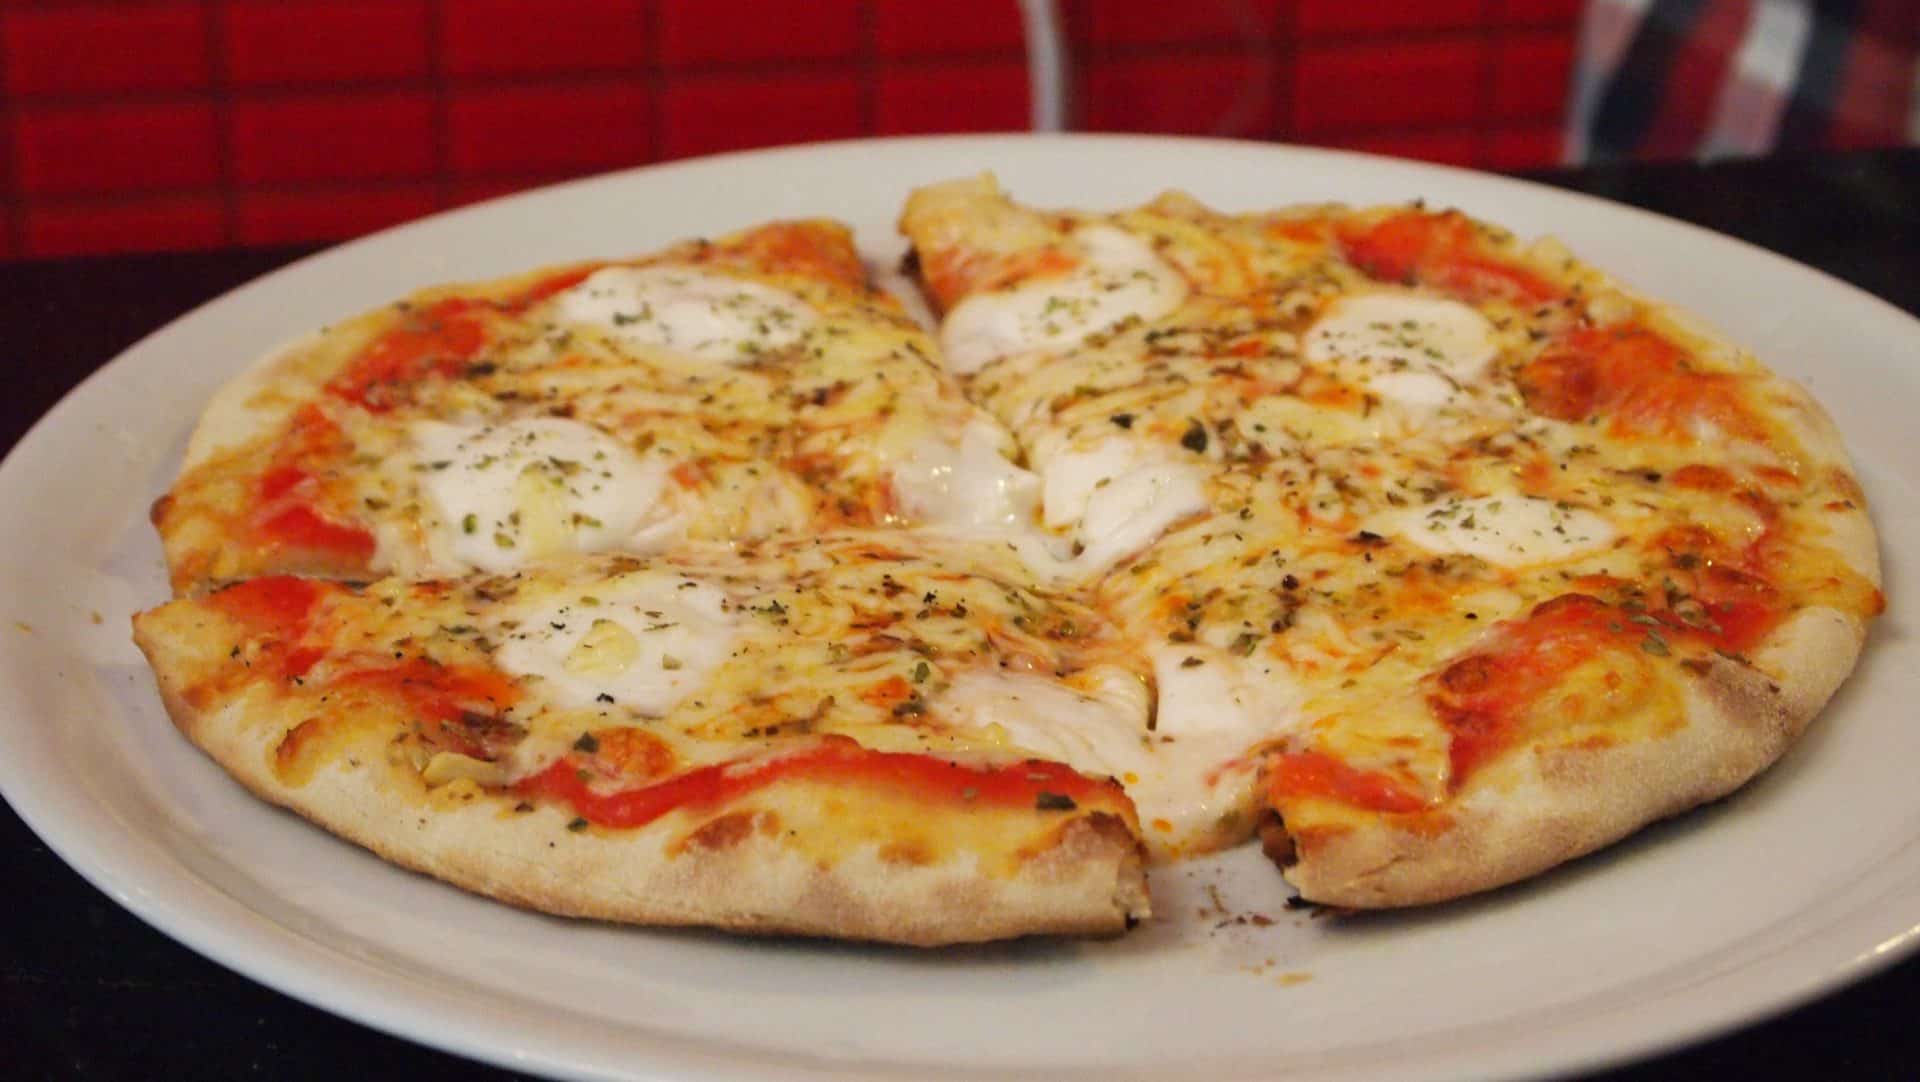 Malapizzas Malaga Serves Authentic Pizza from Naples